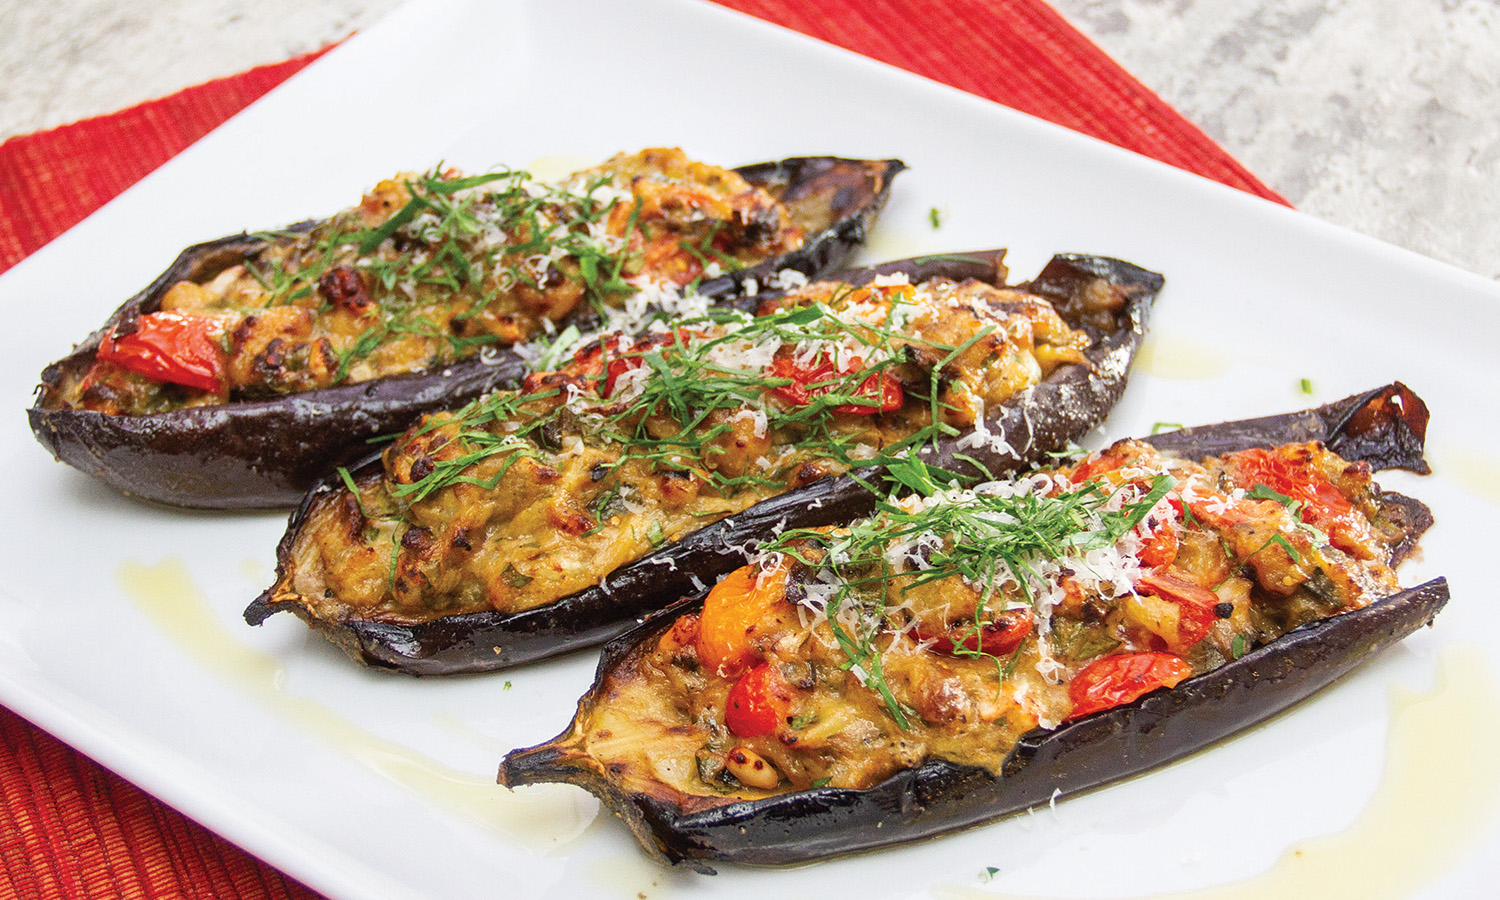 Chicken, Tomato and Herb-Stuffed Eggplant